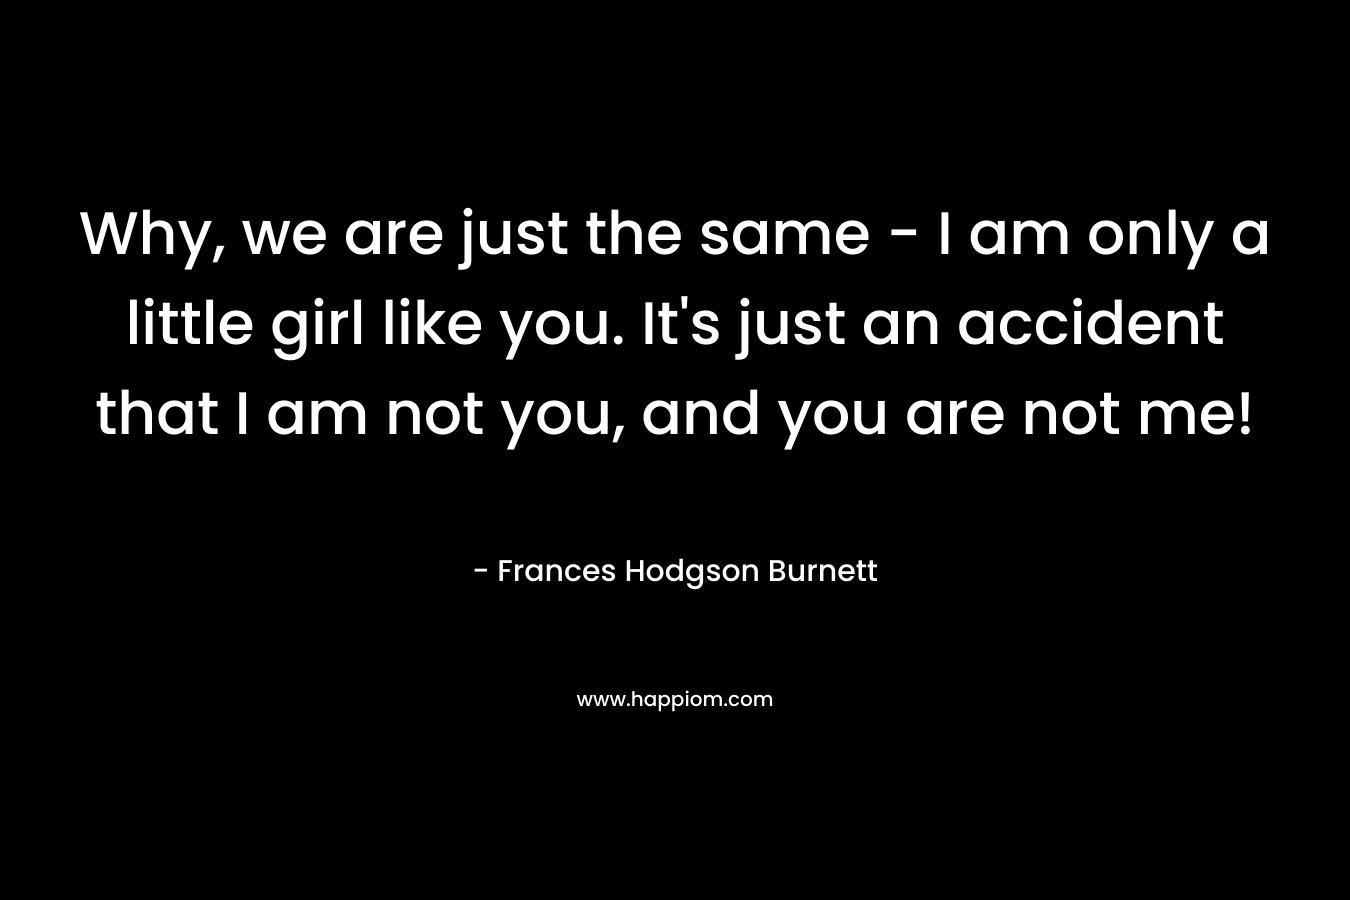 Why, we are just the same – I am only a little girl like you. It’s just an accident that I am not you, and you are not me! – Frances Hodgson Burnett